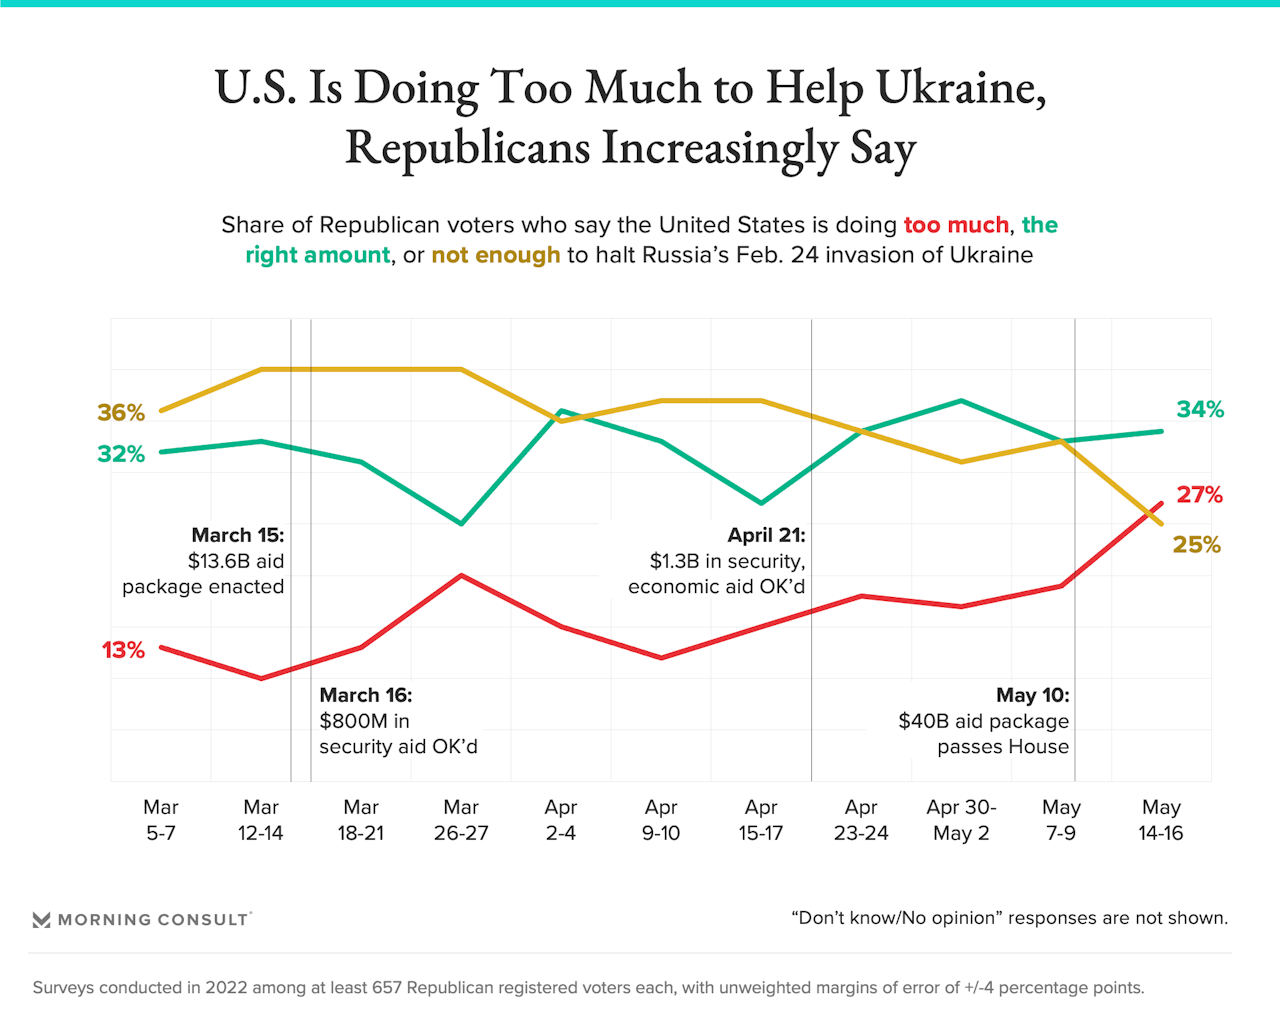 Chart conveying Republican views on United States aid to Ukraine amid war.